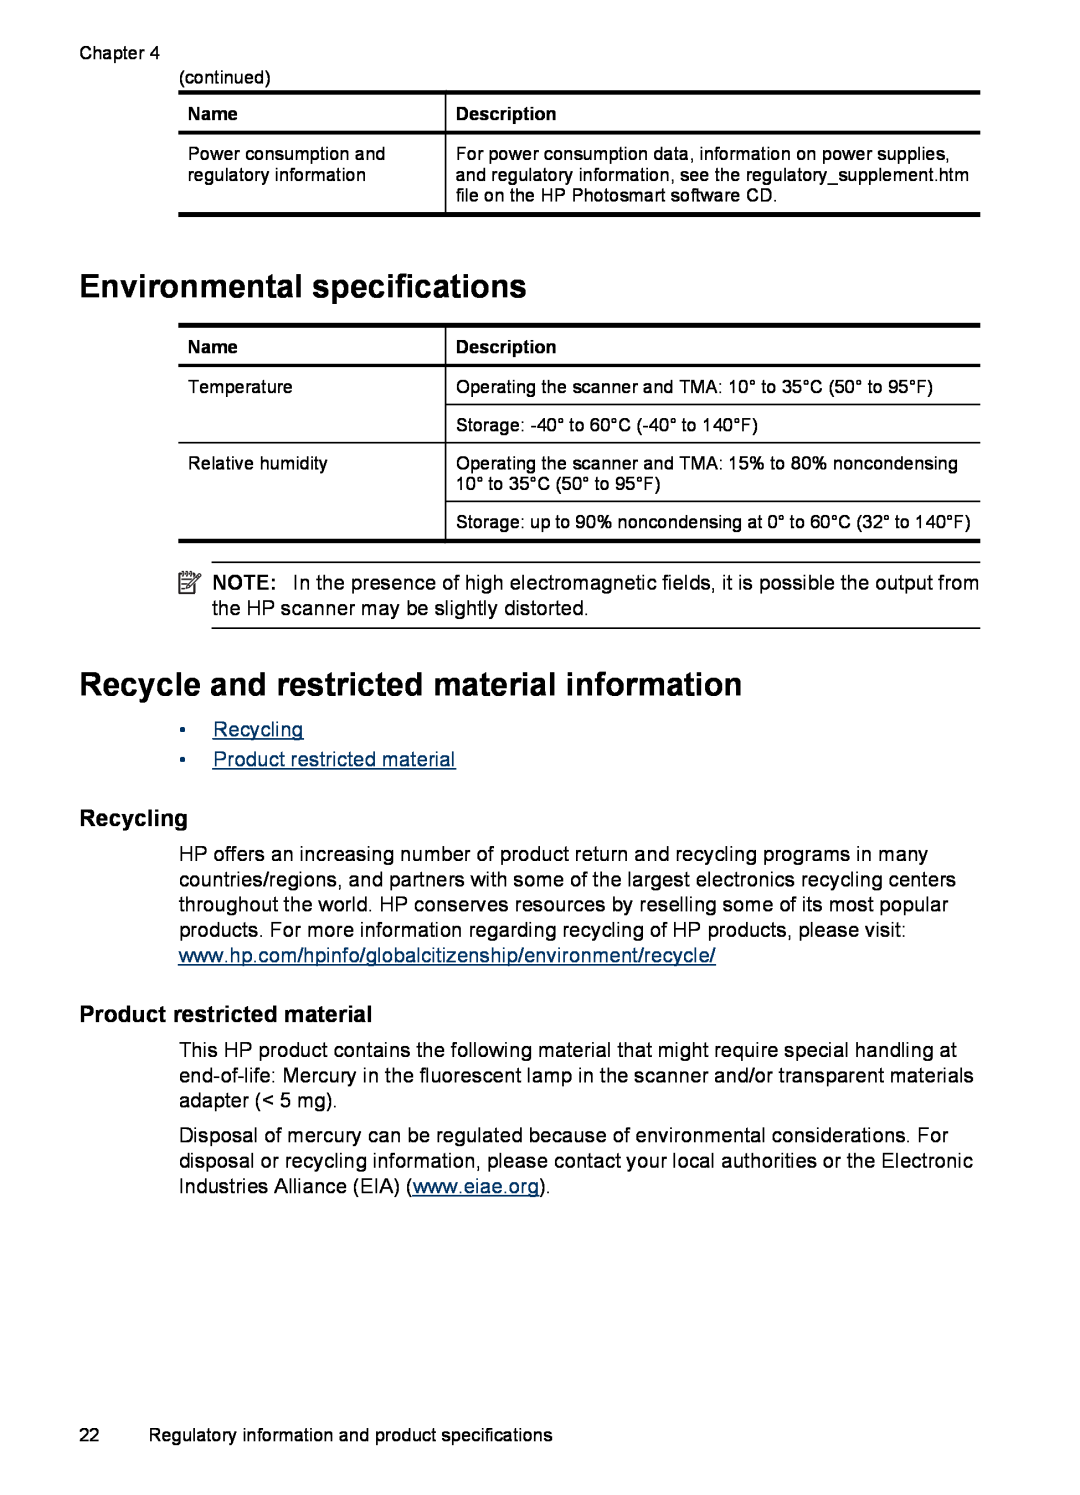 HP G3110 L2698A manual Environmental specifications, Recycle and restricted material information, Recycling 